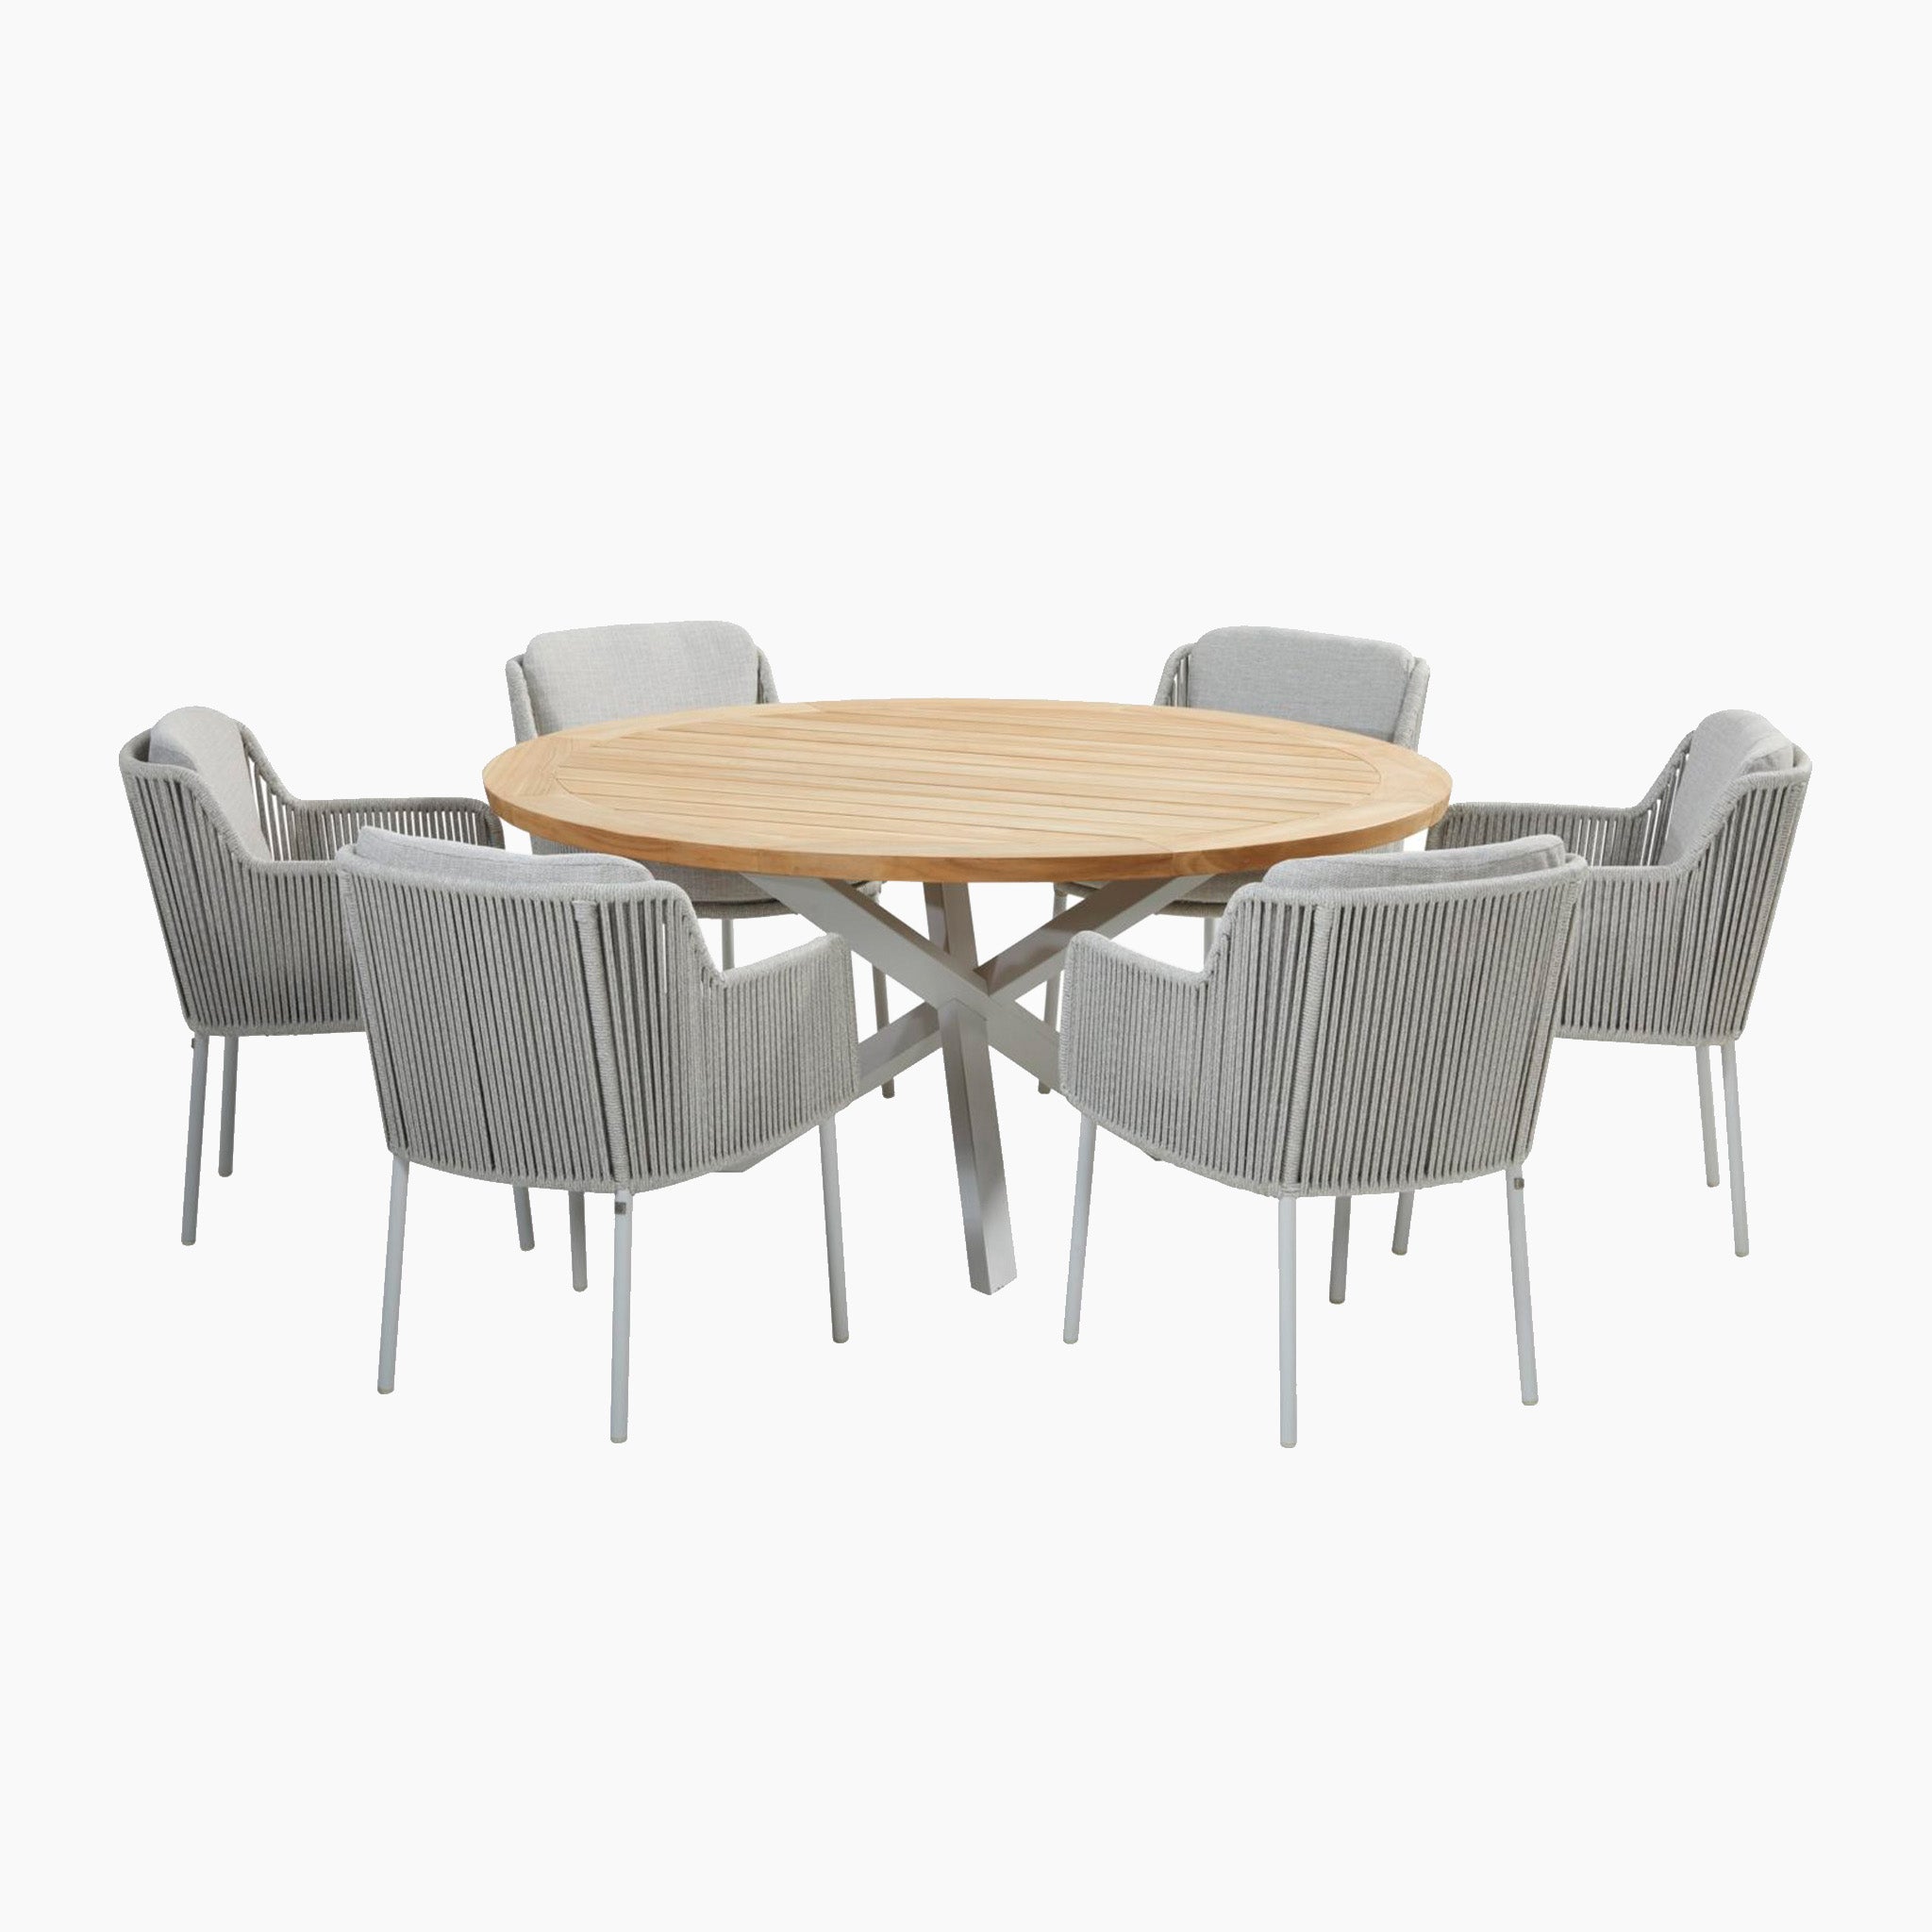 Bernini 6 Seat Round Dining with Teak Table in Light Grey